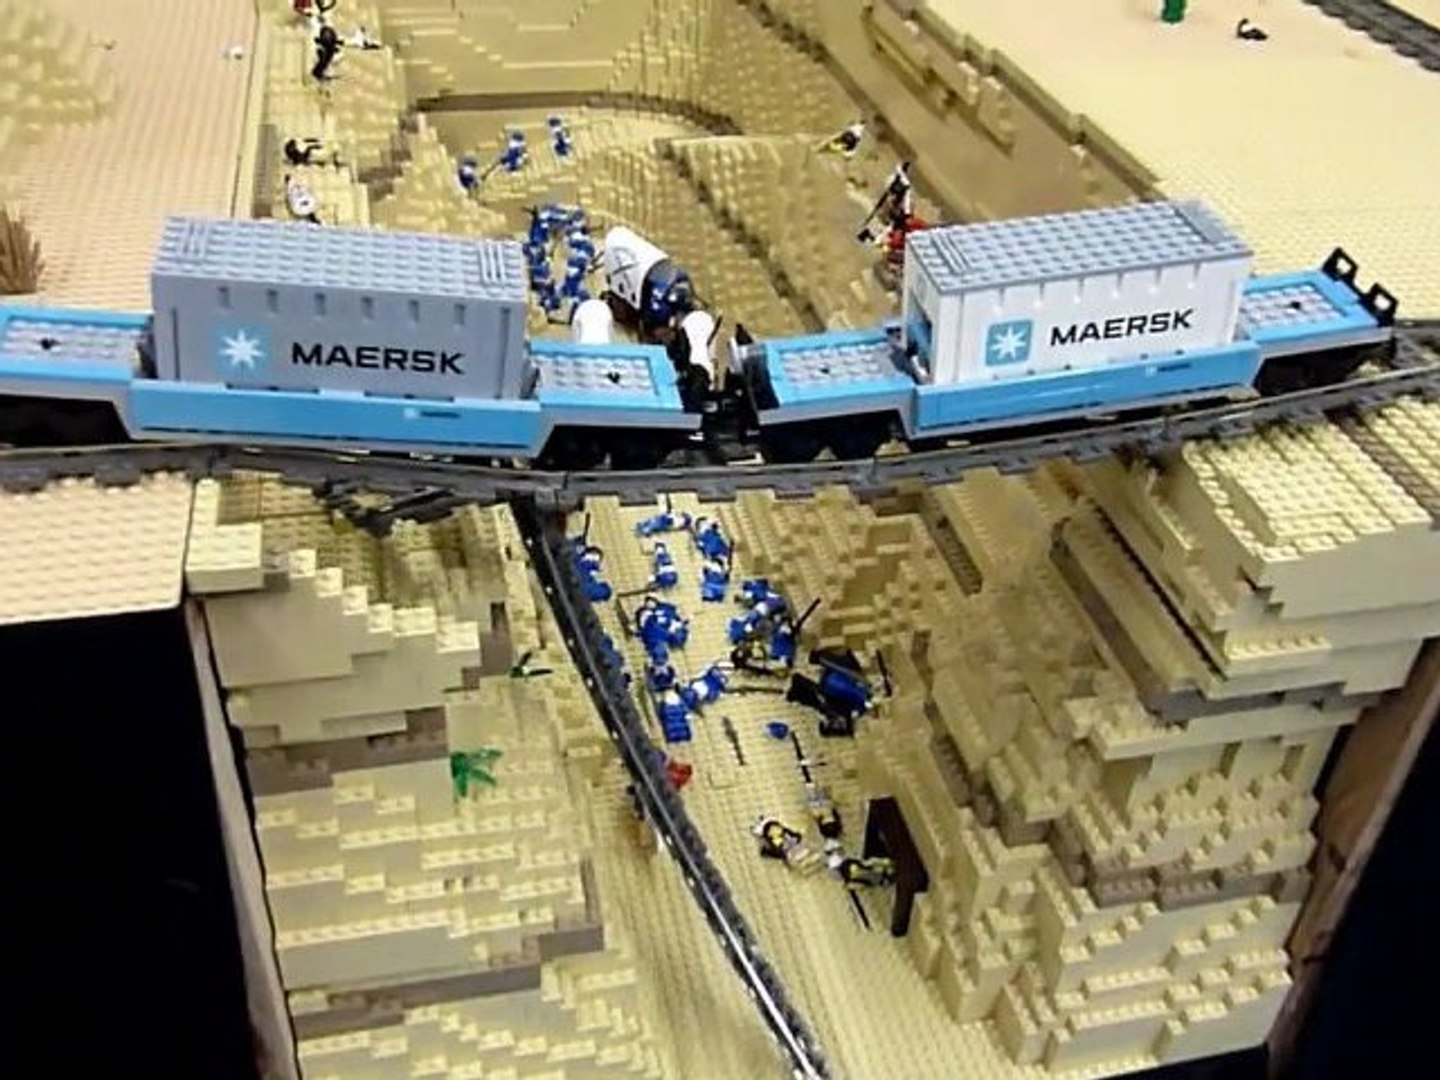 Lego - Maersk and the canyon StRambert 2011 - Vidéo Dailymotion